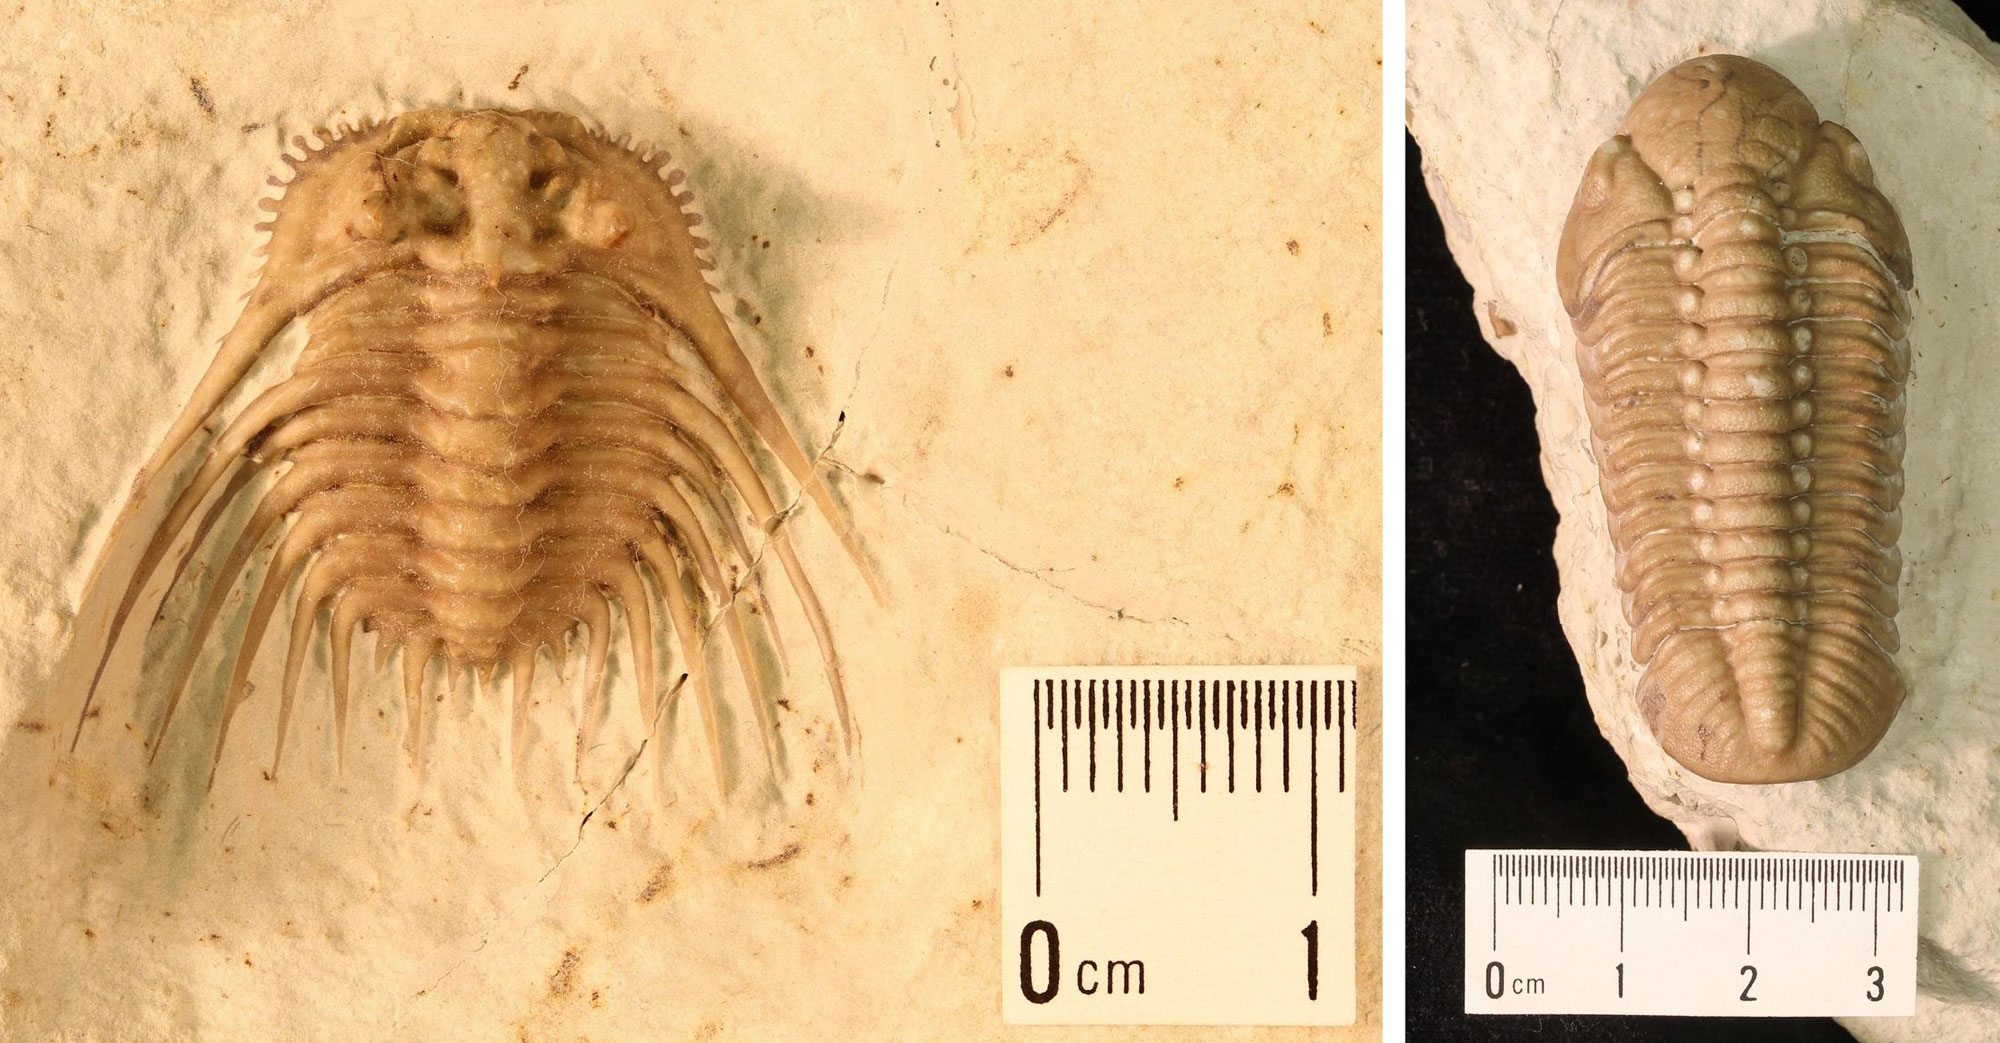 2-Panel images showing photographs of Devonian trilobites from Oklahoma. Left: A small trilobite with lateral spines. Right: An elongated trilobite with little ornamentation.